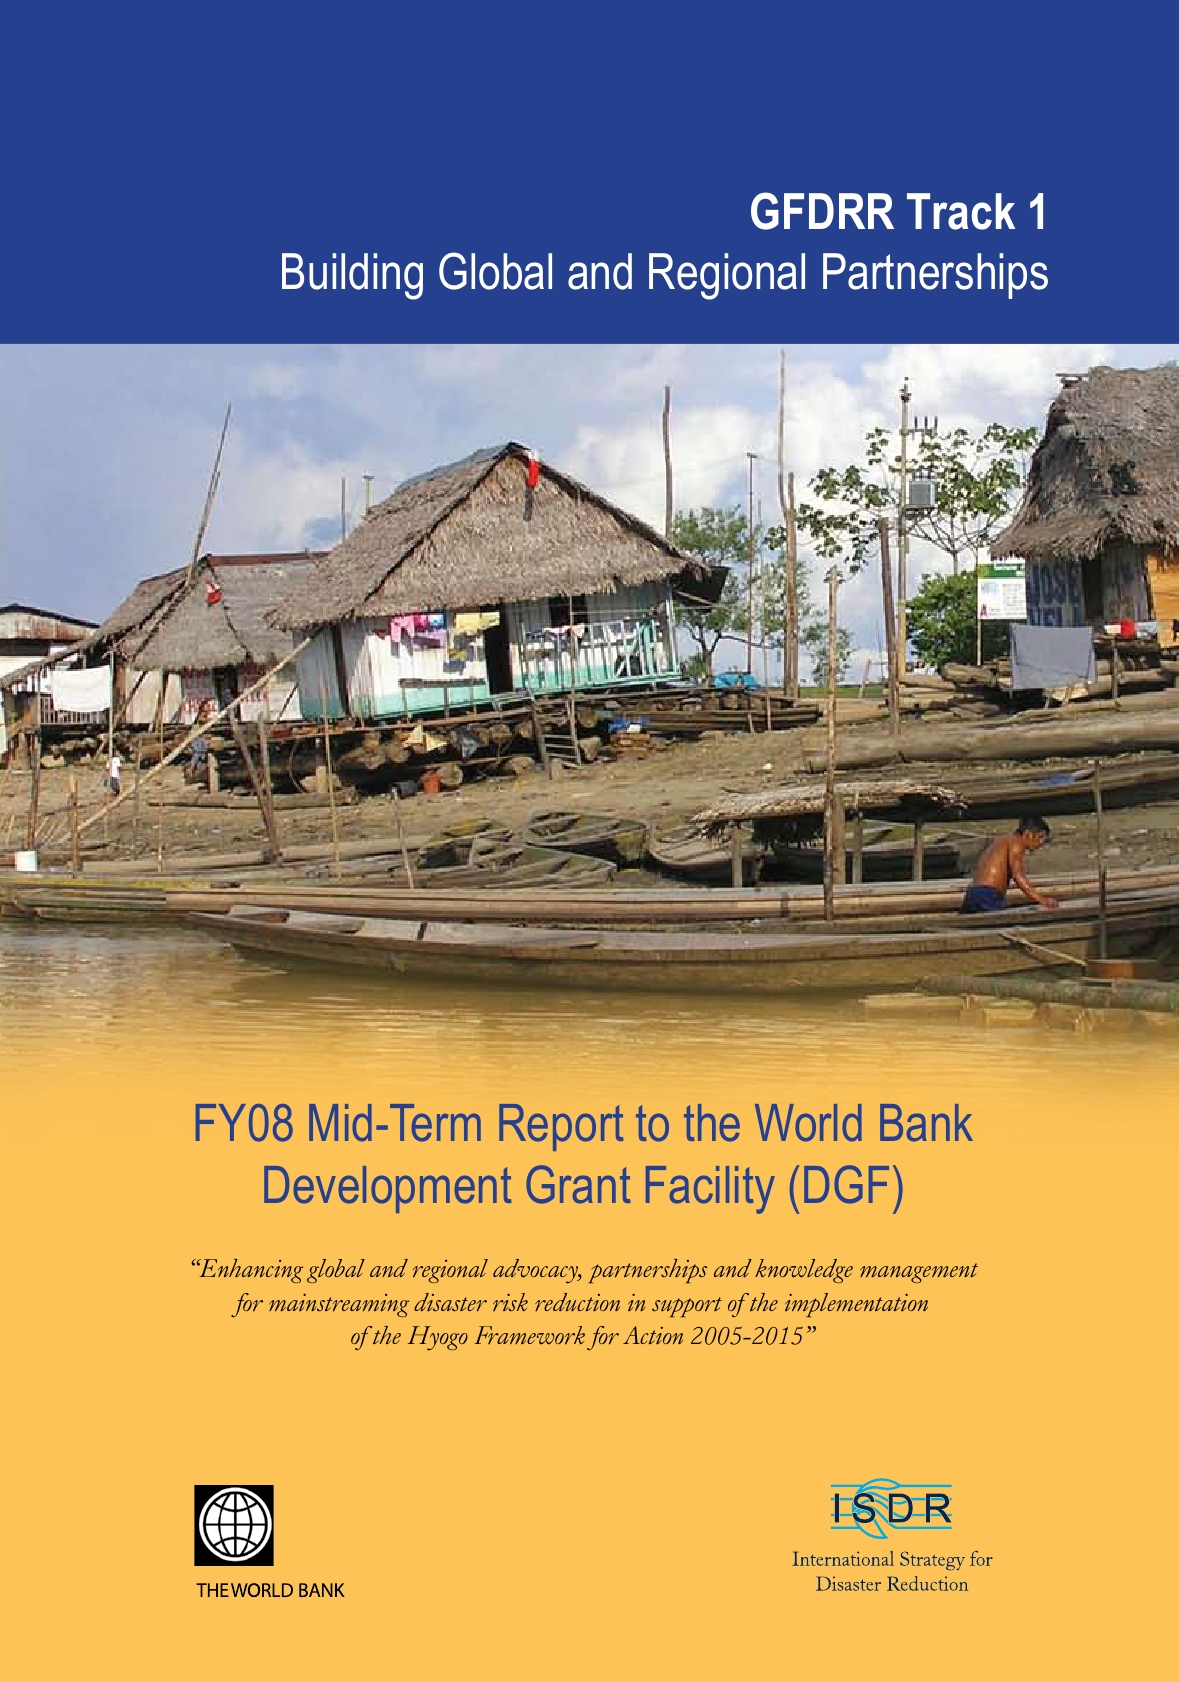 The present report constitutes the Mid-Term Report submitted to the World Bank by the UNISDR secretariat for the World Bank’s Development Grant Facility (DGF) FY08.&nbsp;<br style="padding: 0px; margin: 0px;"><br style="padding: 0px; margin: 0px;">Through Track-I, Global Facility for Disaster Reduction and Recovery (GFDRR) responds to disaster risk reduction needs at the global and regional levels in line with the Hyogo Framework for Action (HFA) priorities. With funding from the World Bank’s Development Grant Facility, the International Strategy for Disaster Reduction Secretariat manages the Track I work program. Track-I epitomizes the strong partnership for disaster risk reduction that the UN and the World Bank have formed through GFDRR. Track-I supports ISDR’s global and regional processes to leverage country resources for ex-ante investment in prevention, mitigation and preparedness activities, particularly in low and middle-income countries.<br><div><br></div><div>Source: <a href="http://www.unisdr.org/we/inform/publications/7760">UNISDR</a></div>